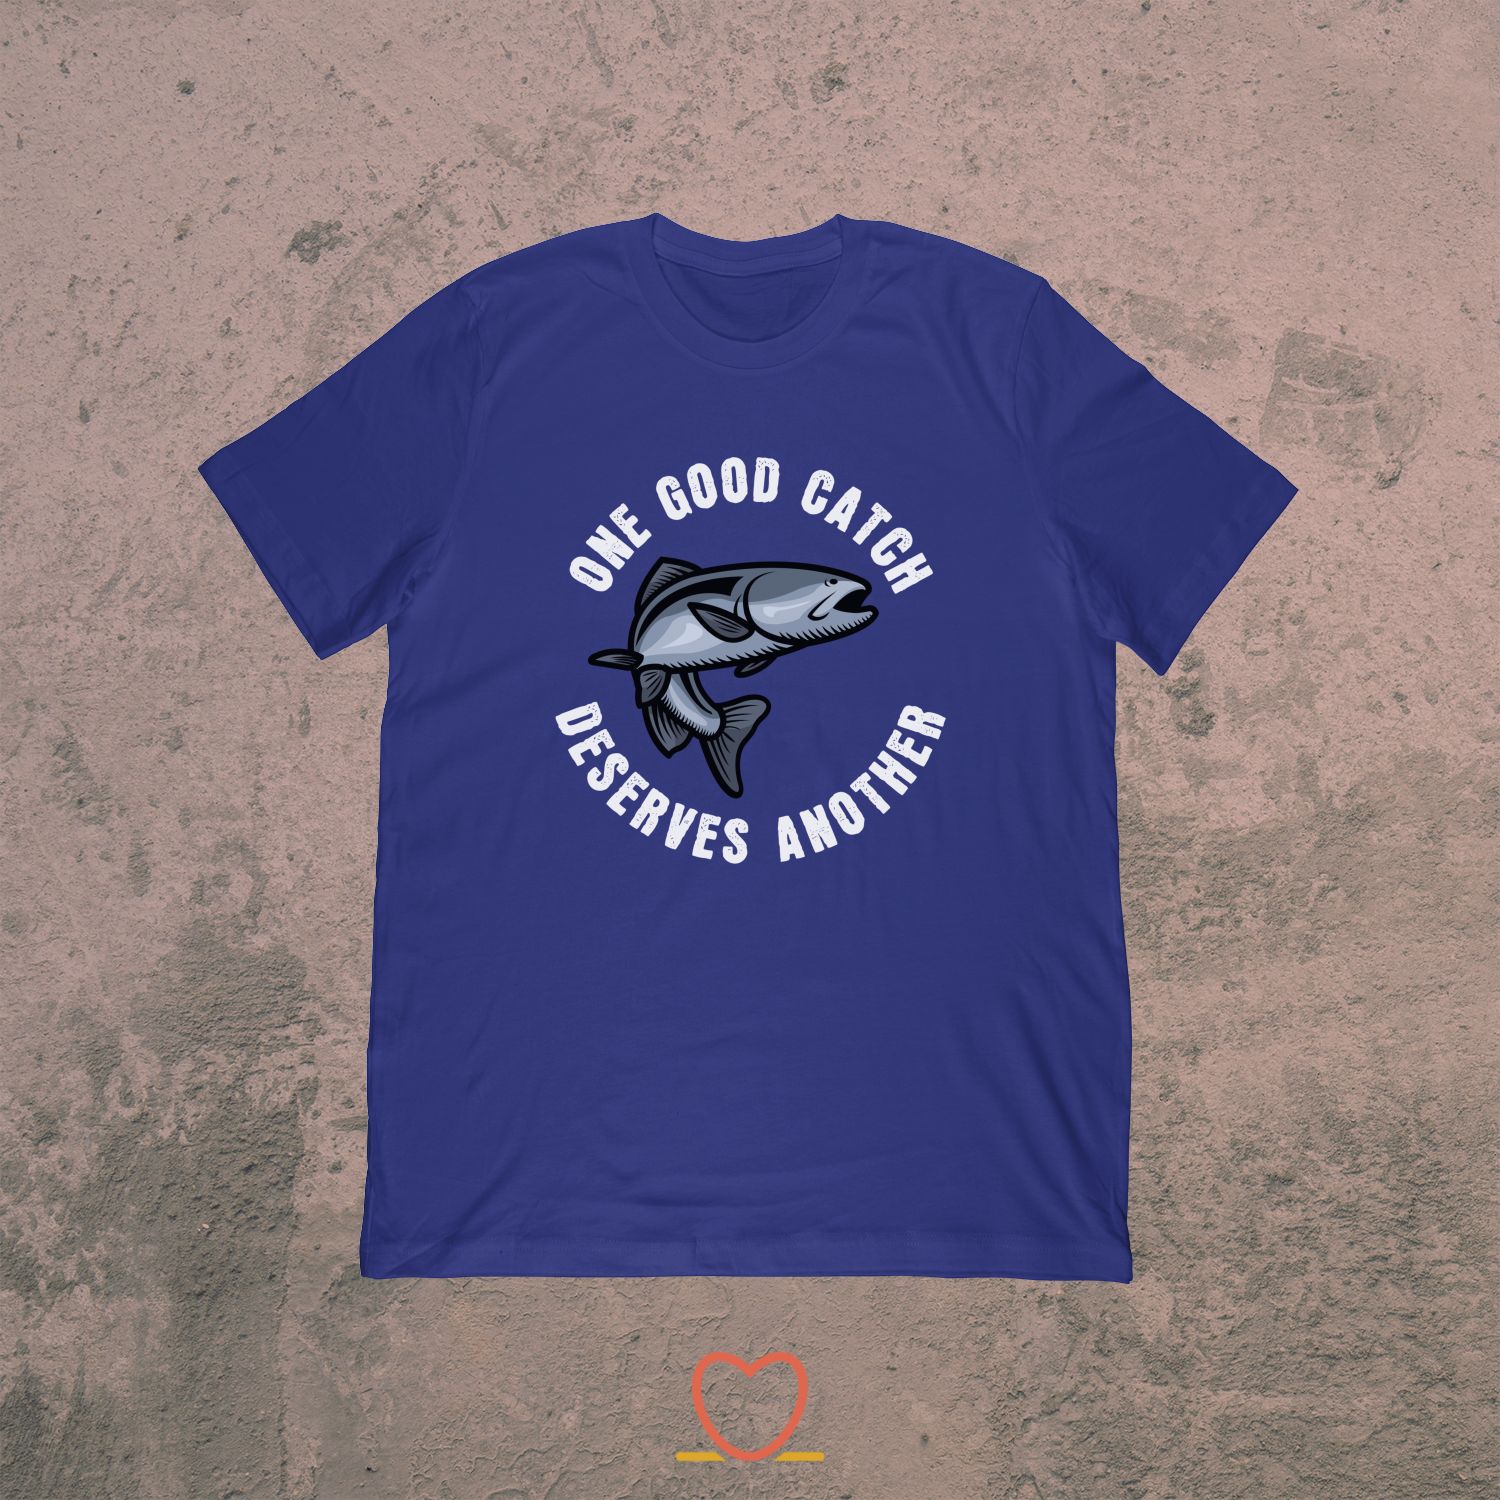 One Good Catch Deserves Another – Funny Angling Tee